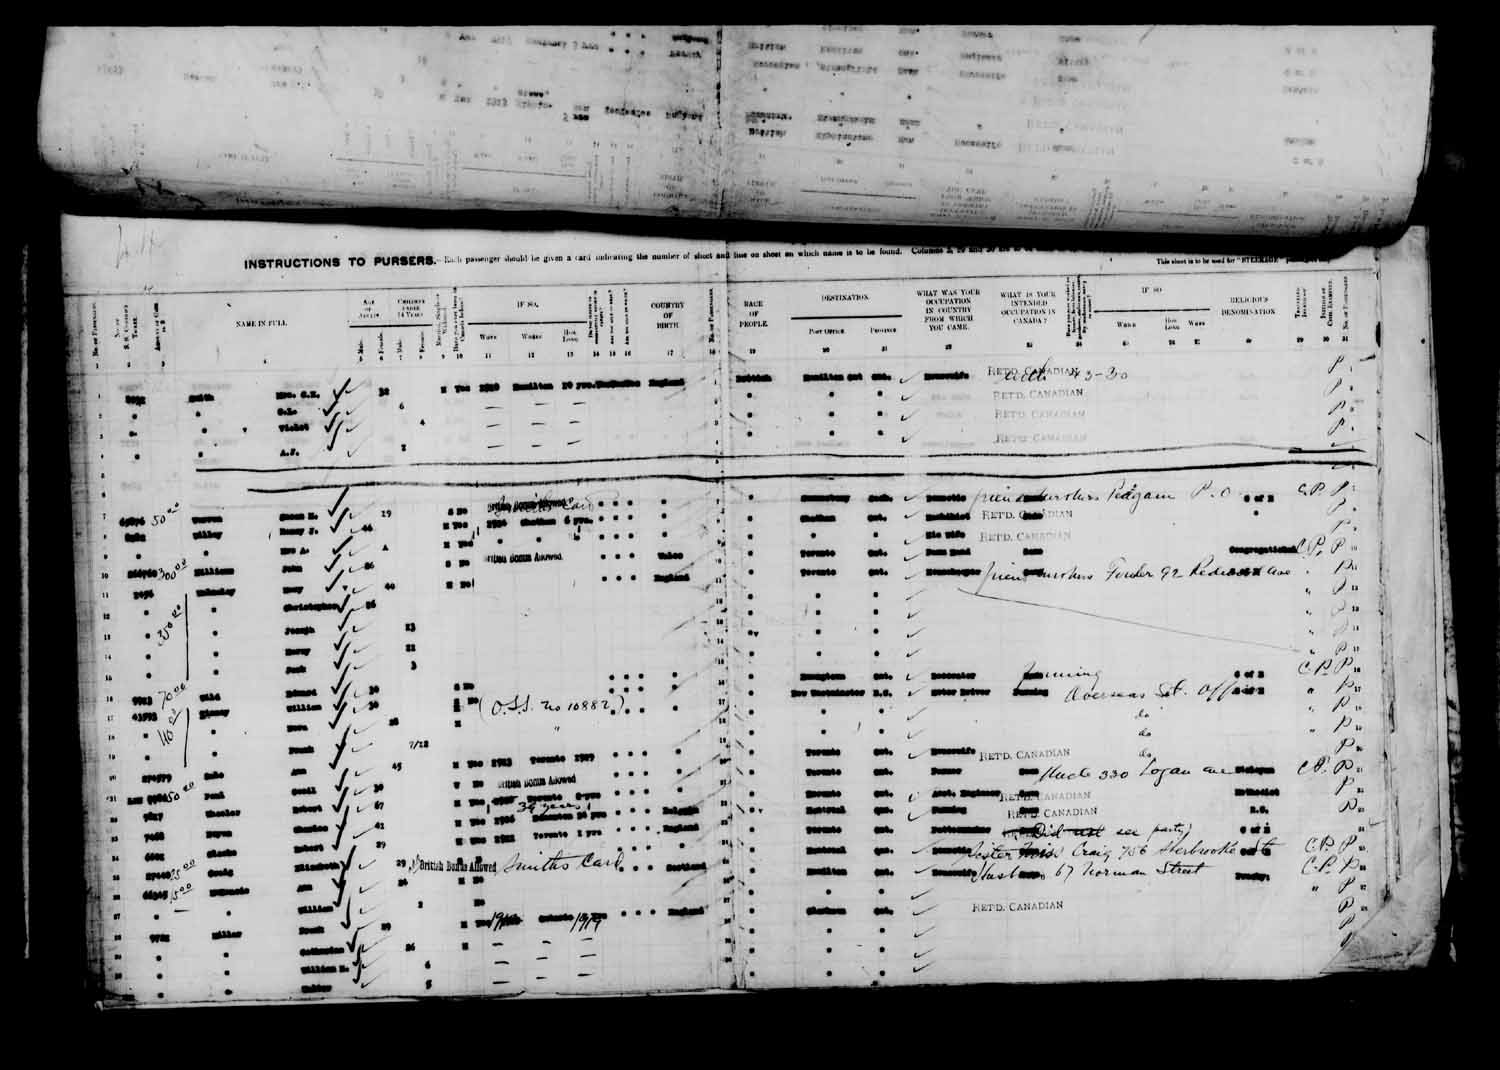 Digitized page of Passenger Lists for Image No.: e003610671